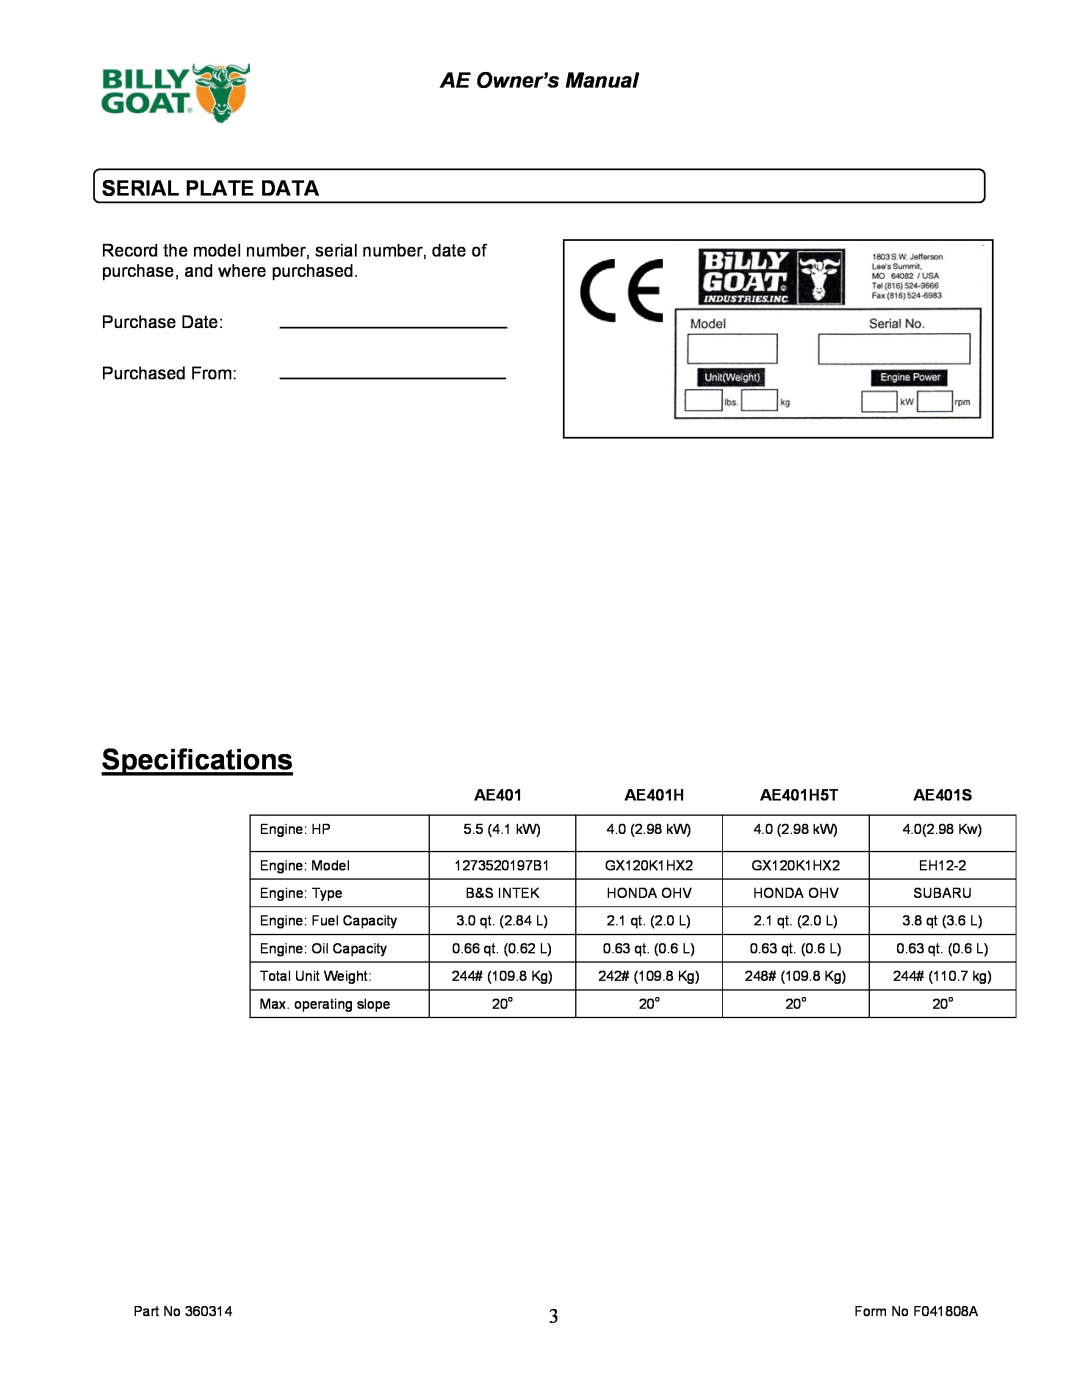 Billy Goat AE401H5T owner manual Serial Plate Data, Specifications, AE401S 